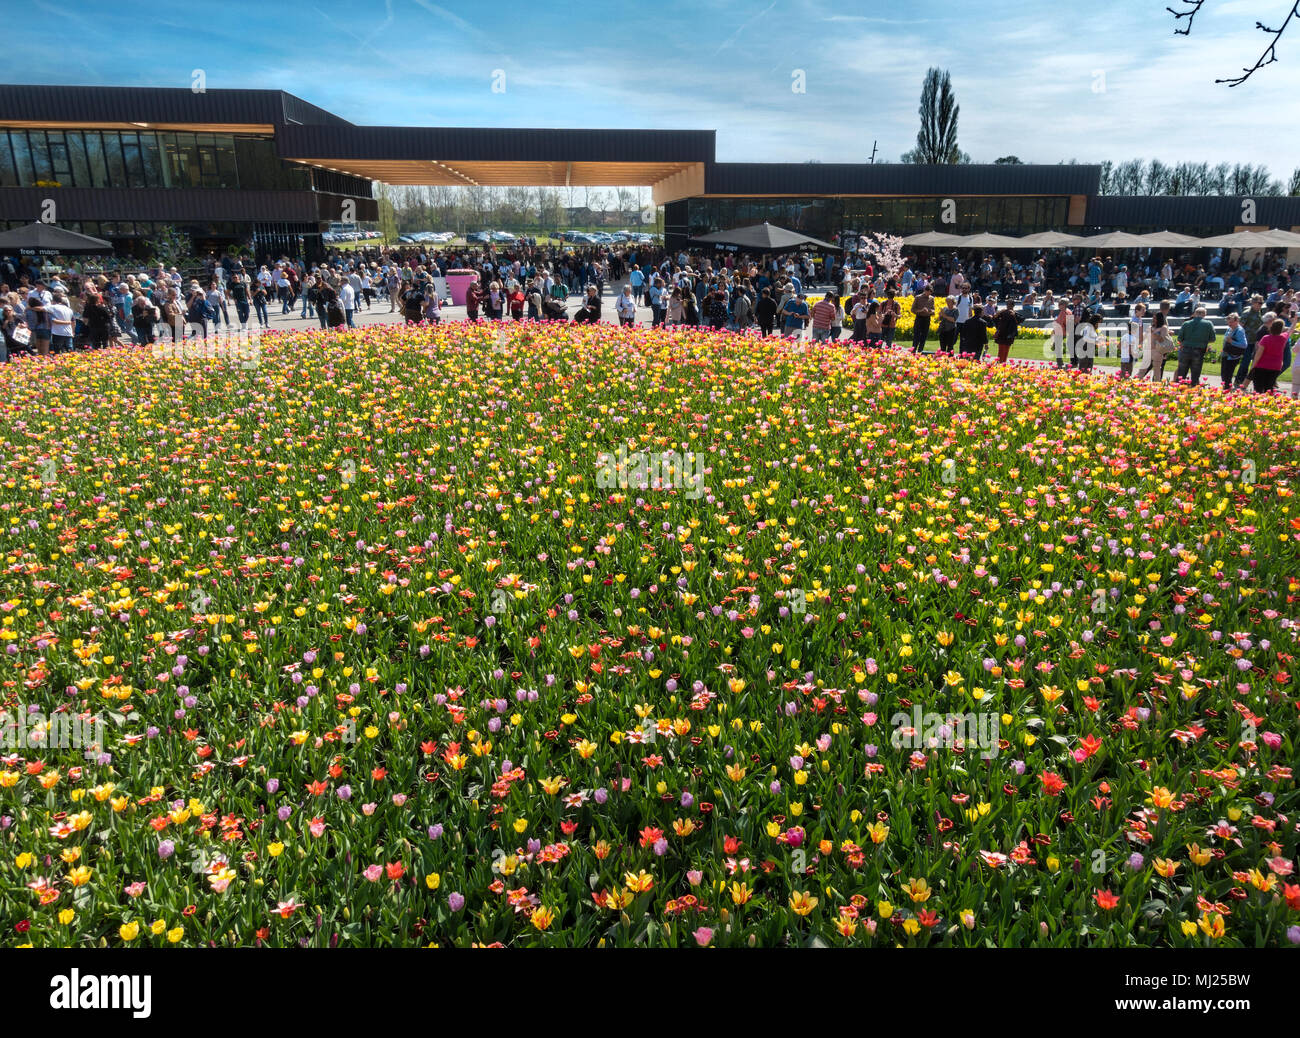 Keukenhof Flower Gardens new entrance building with crowds of visitors and colorful tulips Mixed tulip bed in spring near Amsterdam Stock Photo